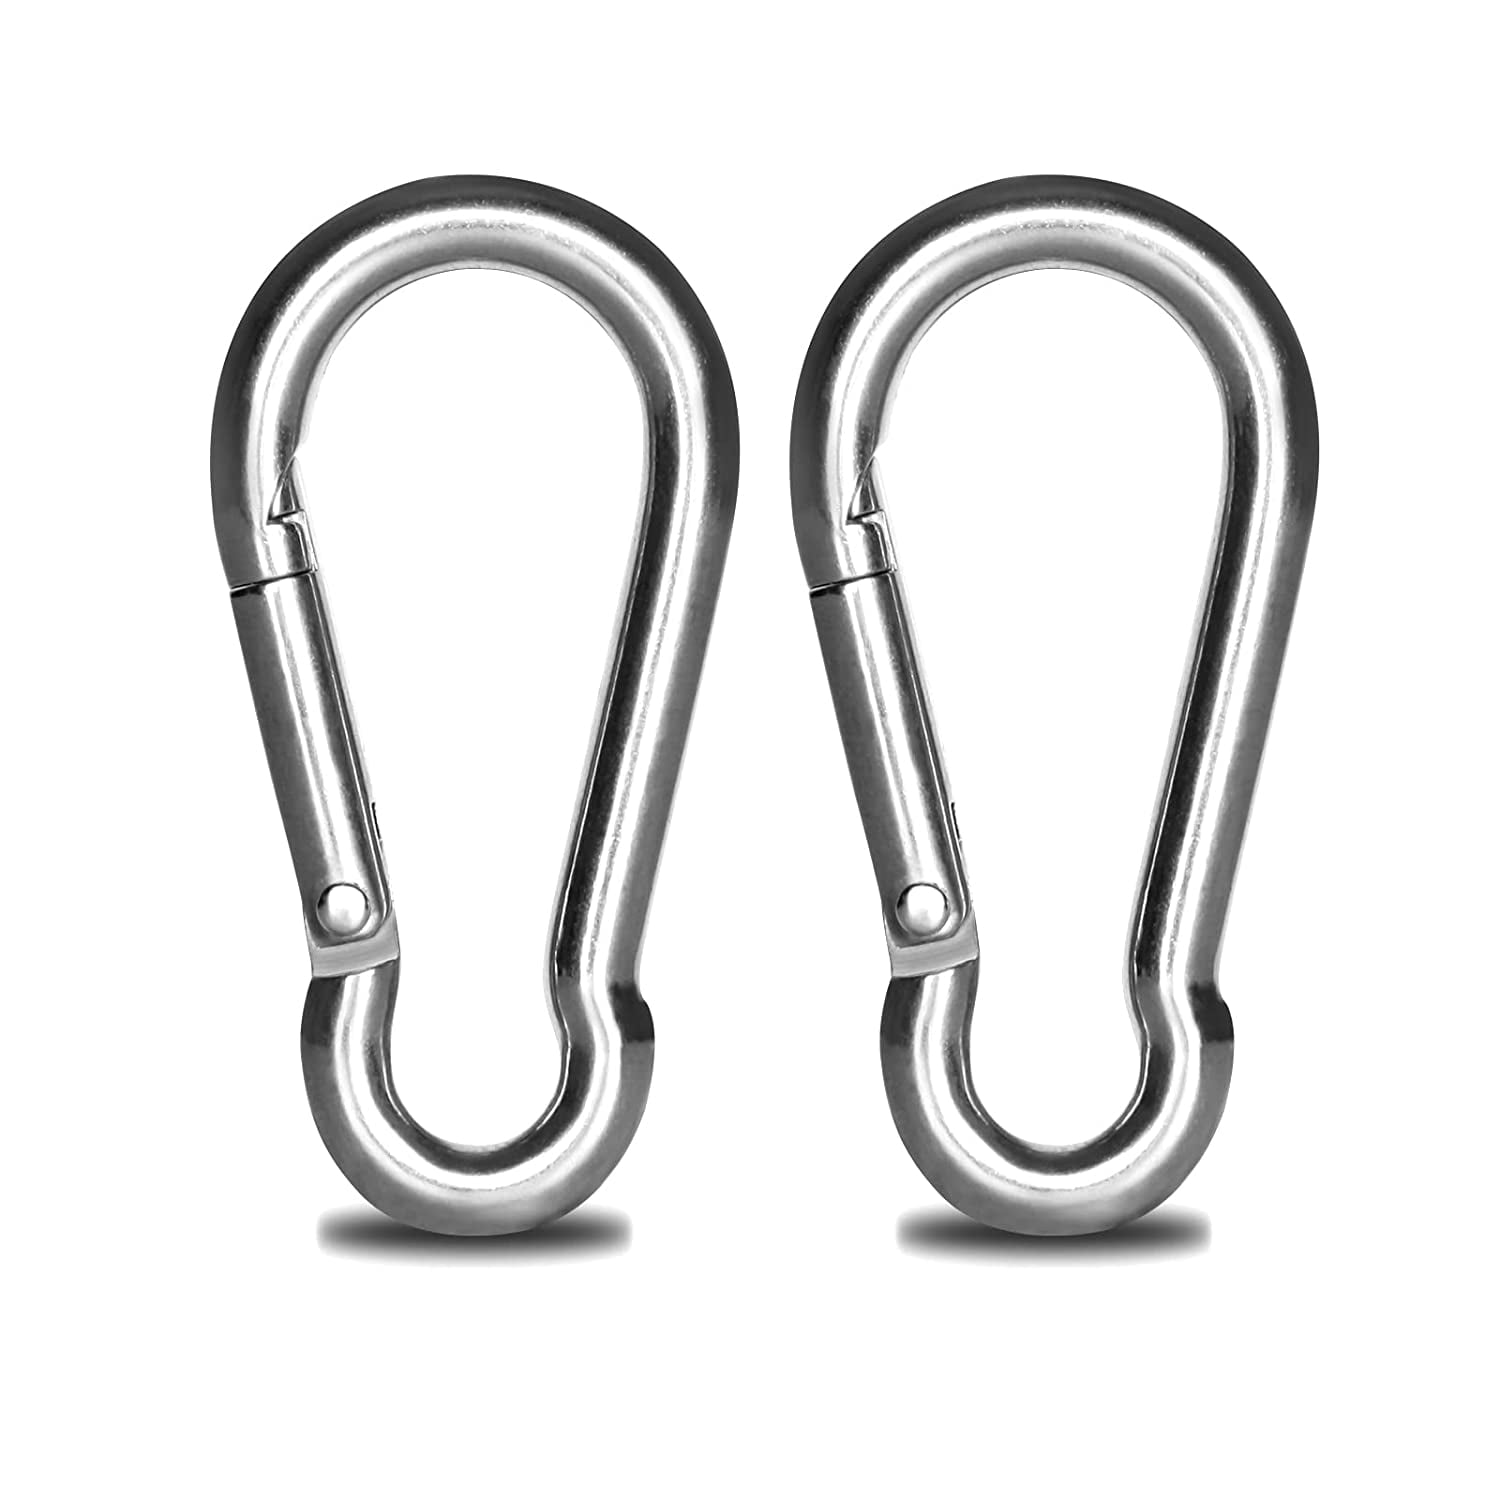 Cage Hangers and Carabiner Clips